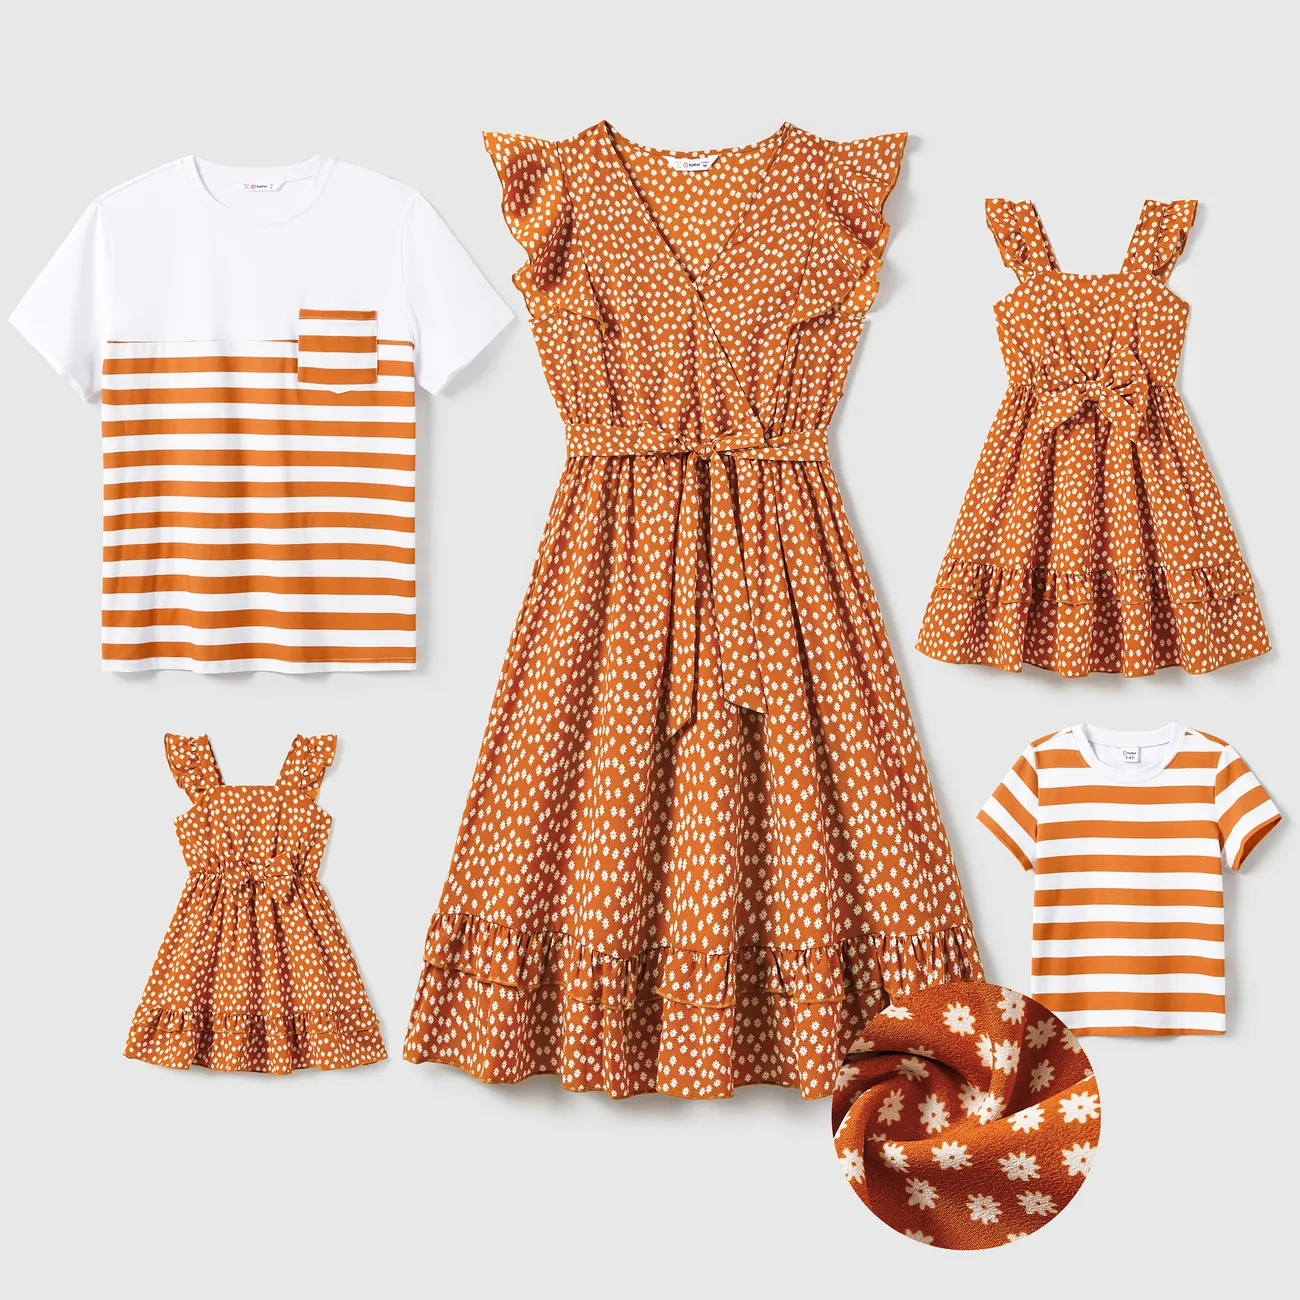 Family Matching Stripe T-Shirt and Ditsy Floral Chiffon Dress with Concealed Button Sets YellowBrown big image 1